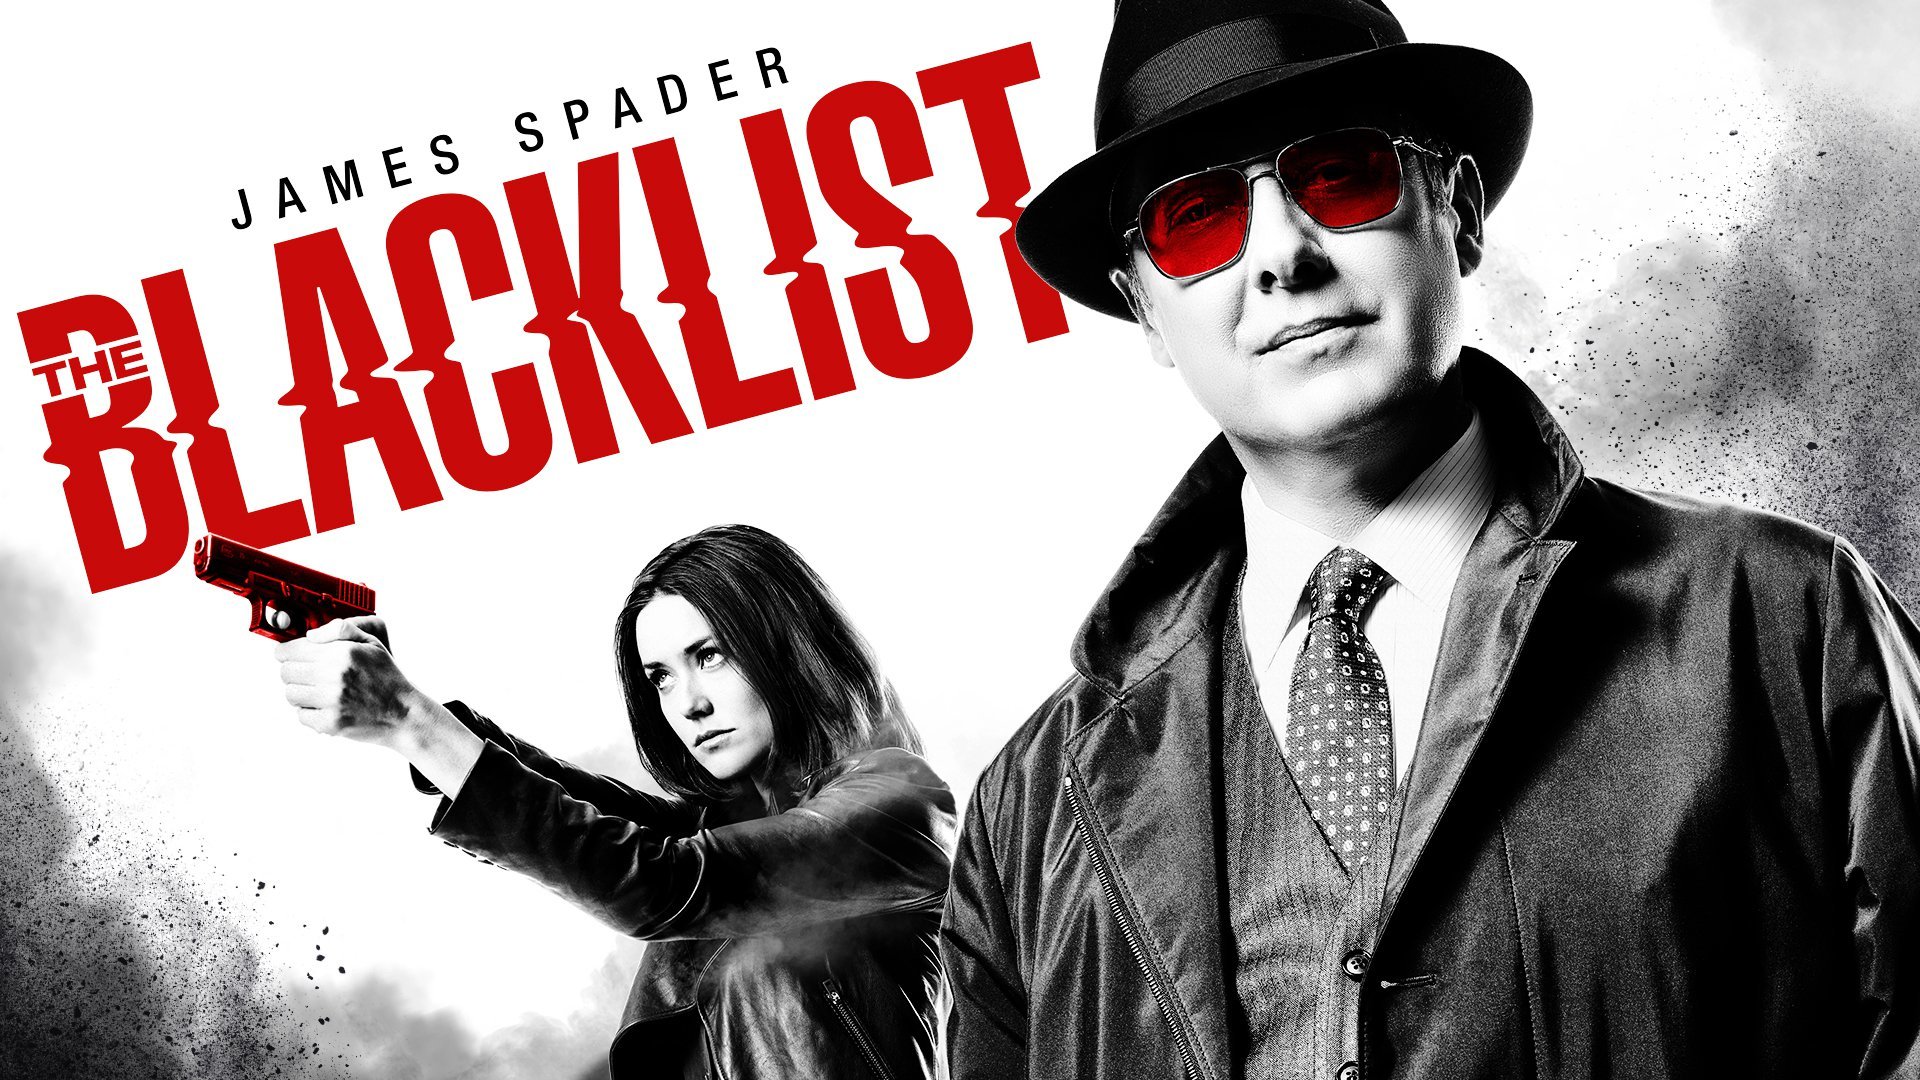 Awesome The Blacklist free wallpaper ID:84525 for full hd 1080p computer